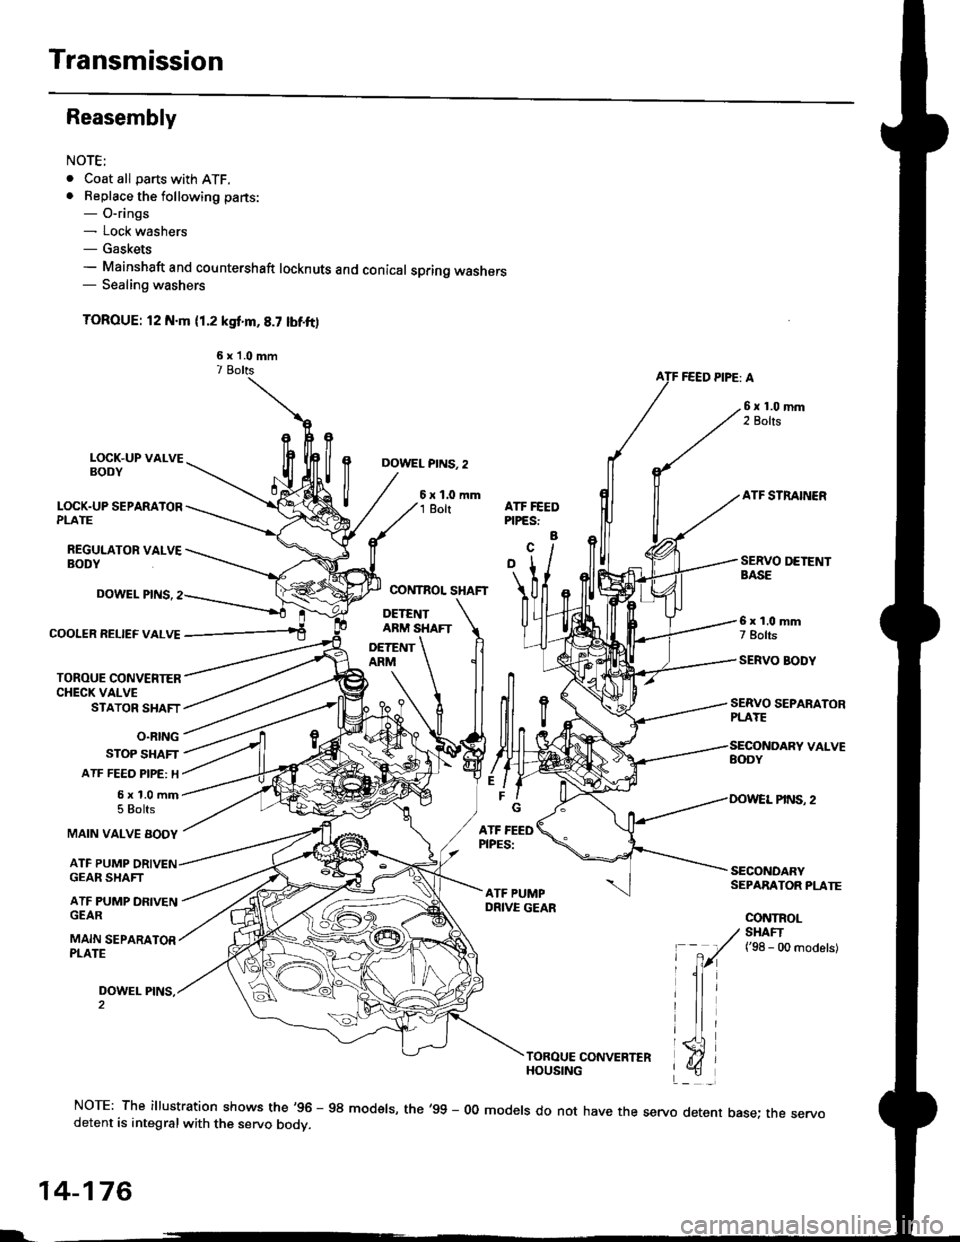 HONDA CIVIC 1998 6.G Workshop Manual Transmission
Reasembly
NOTE;
. Coat all parts with ATF.. Beplace the following parts:- O-rings- Lock washers- Gaskets- Mainshaft and countershaft locknuts and conical spring washers- Sealing washers
T